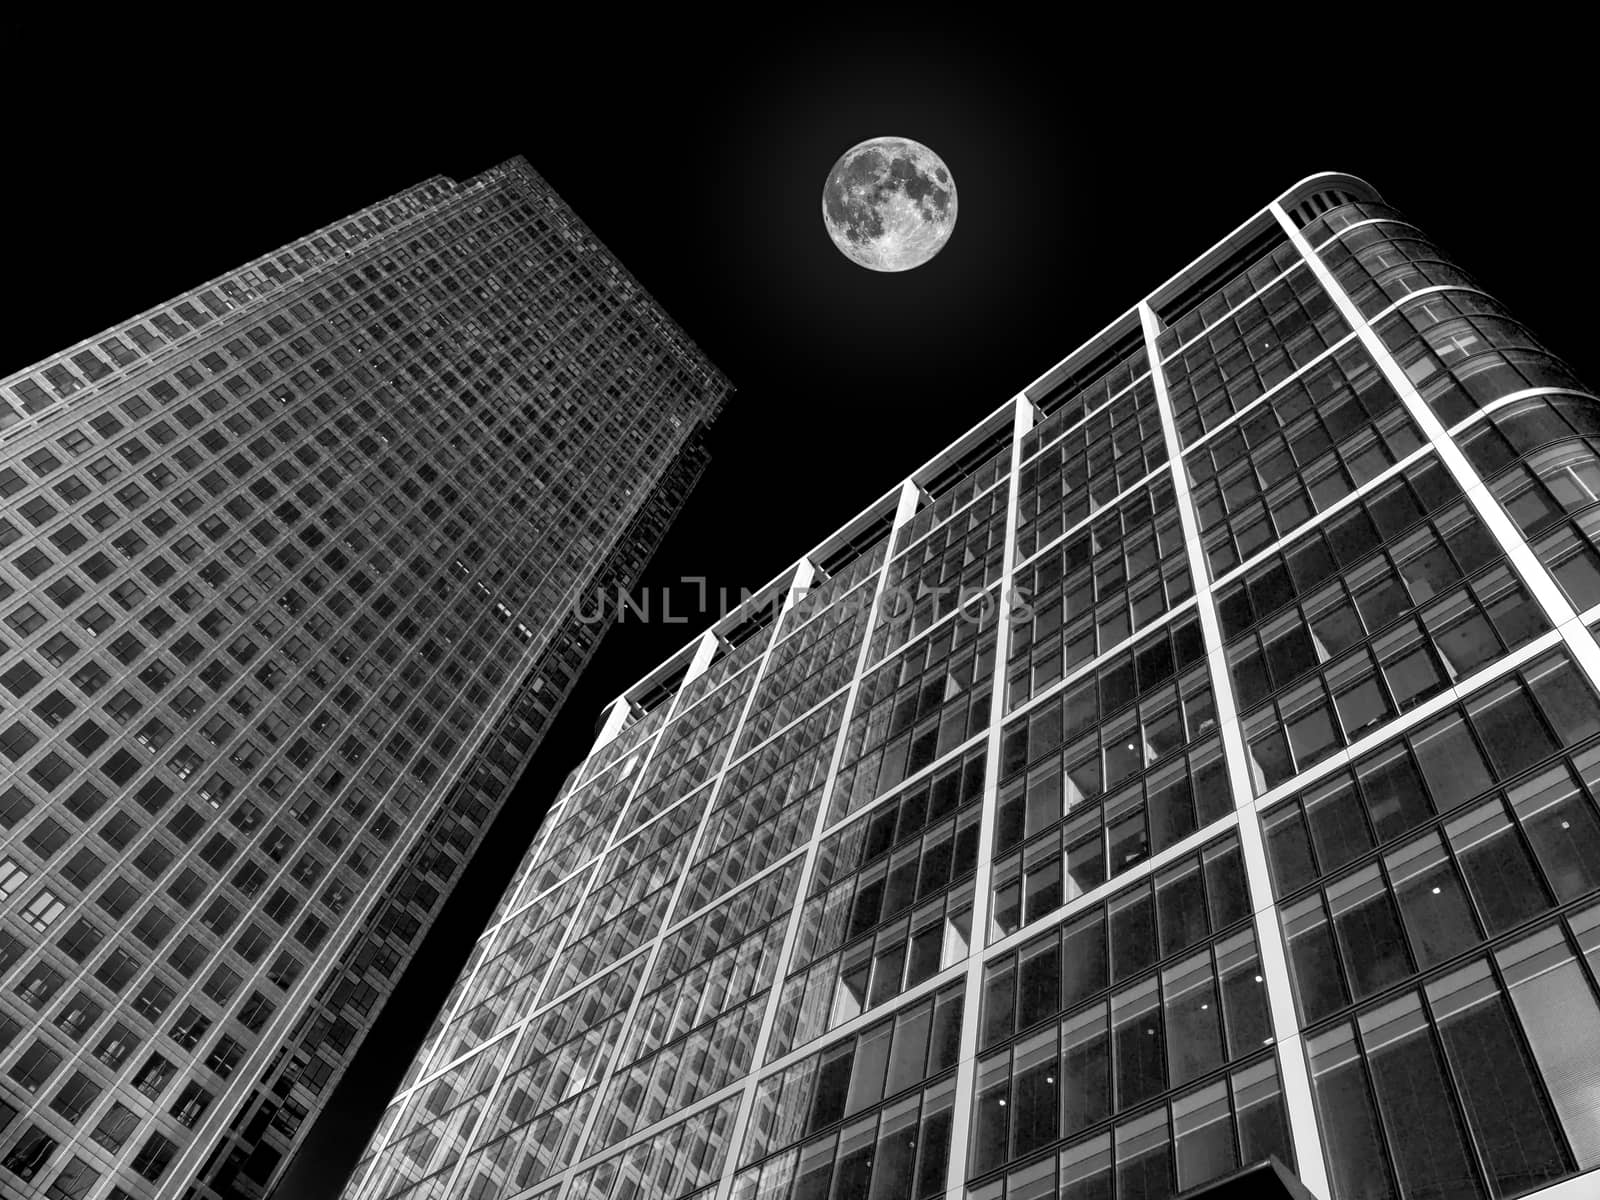 Modern futuristic tower block office skyscraper buildings architecture at night with a full moon